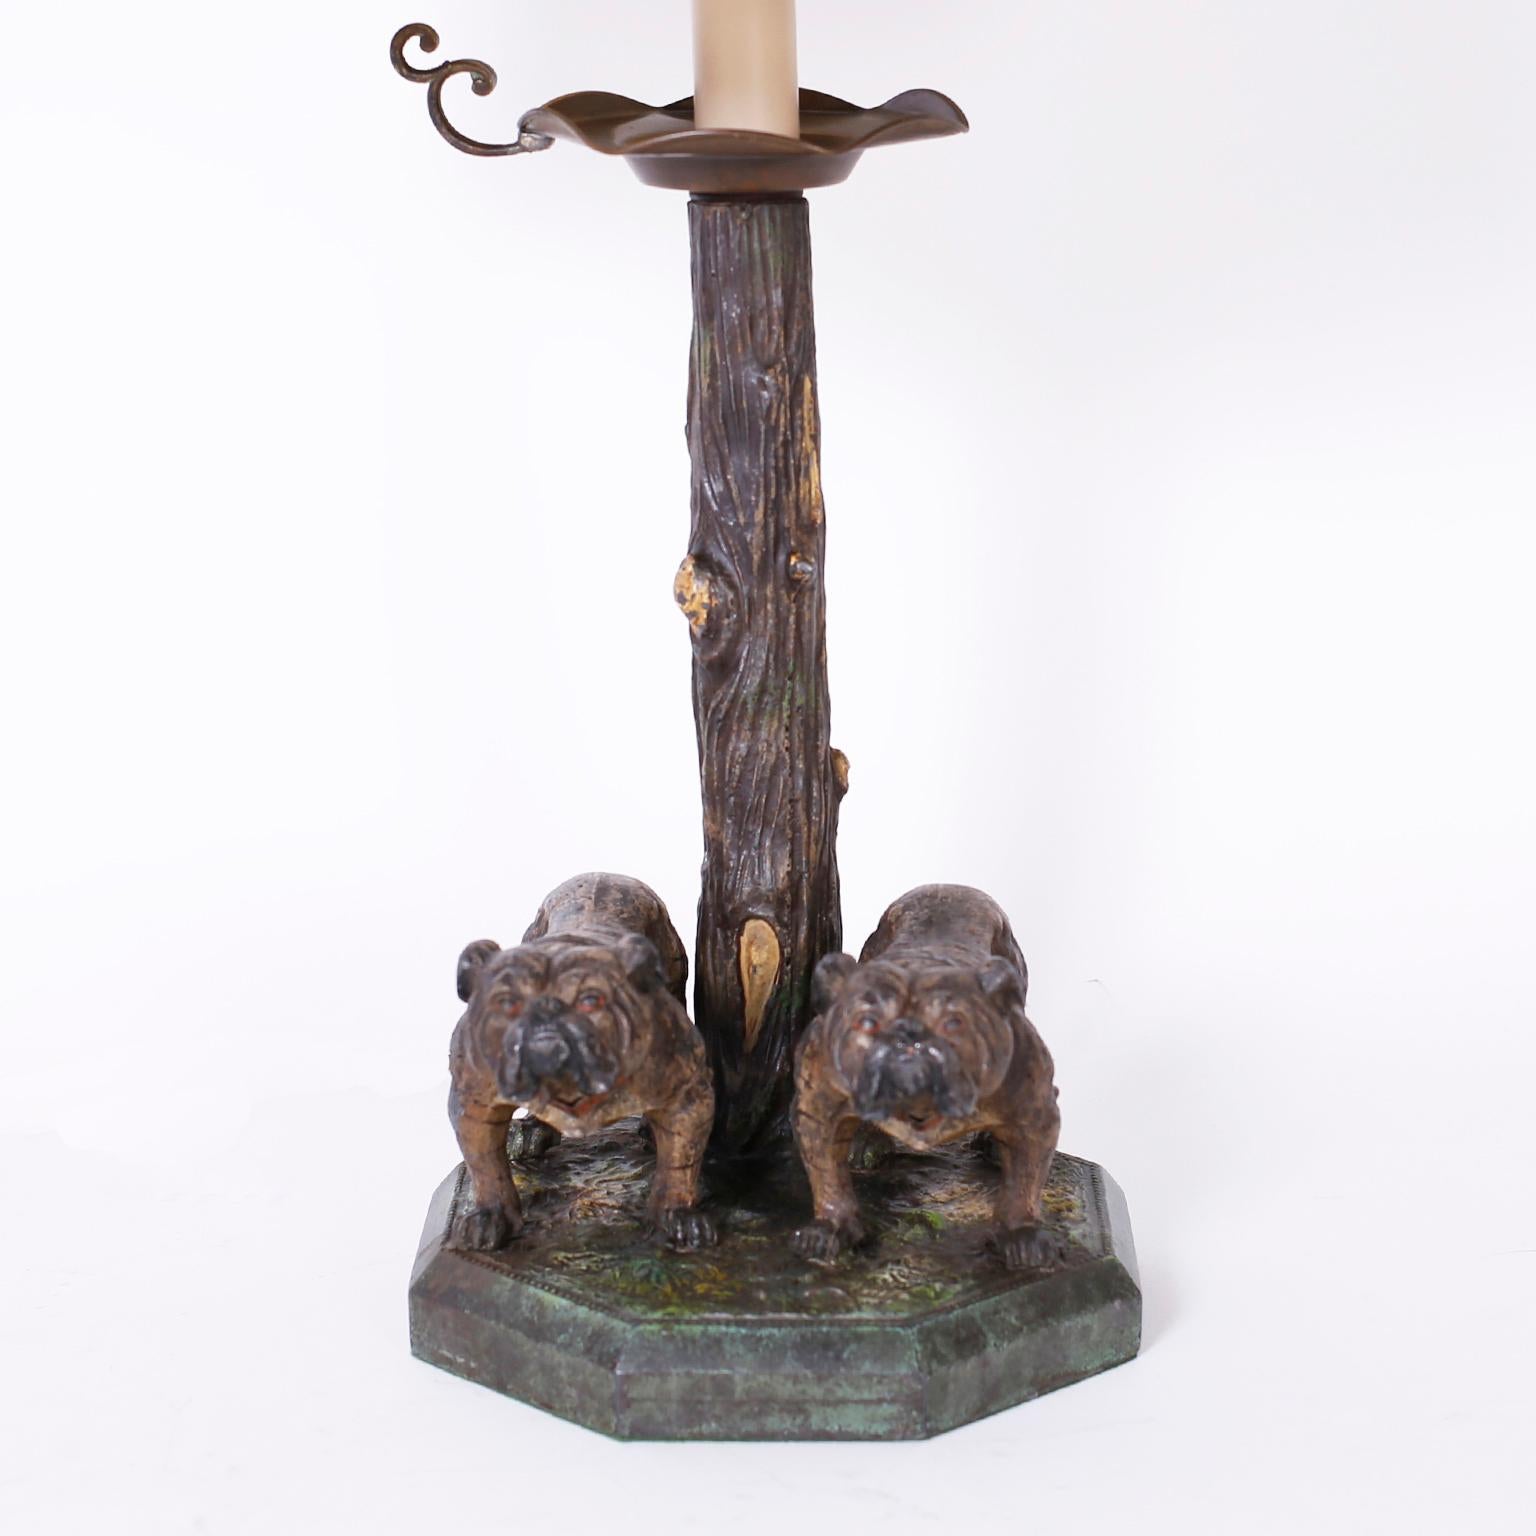 Impressive antique bronze table lamp with a cold painted finish and an acquired patina, depicting two bulldogs and a tree on an octagon base.